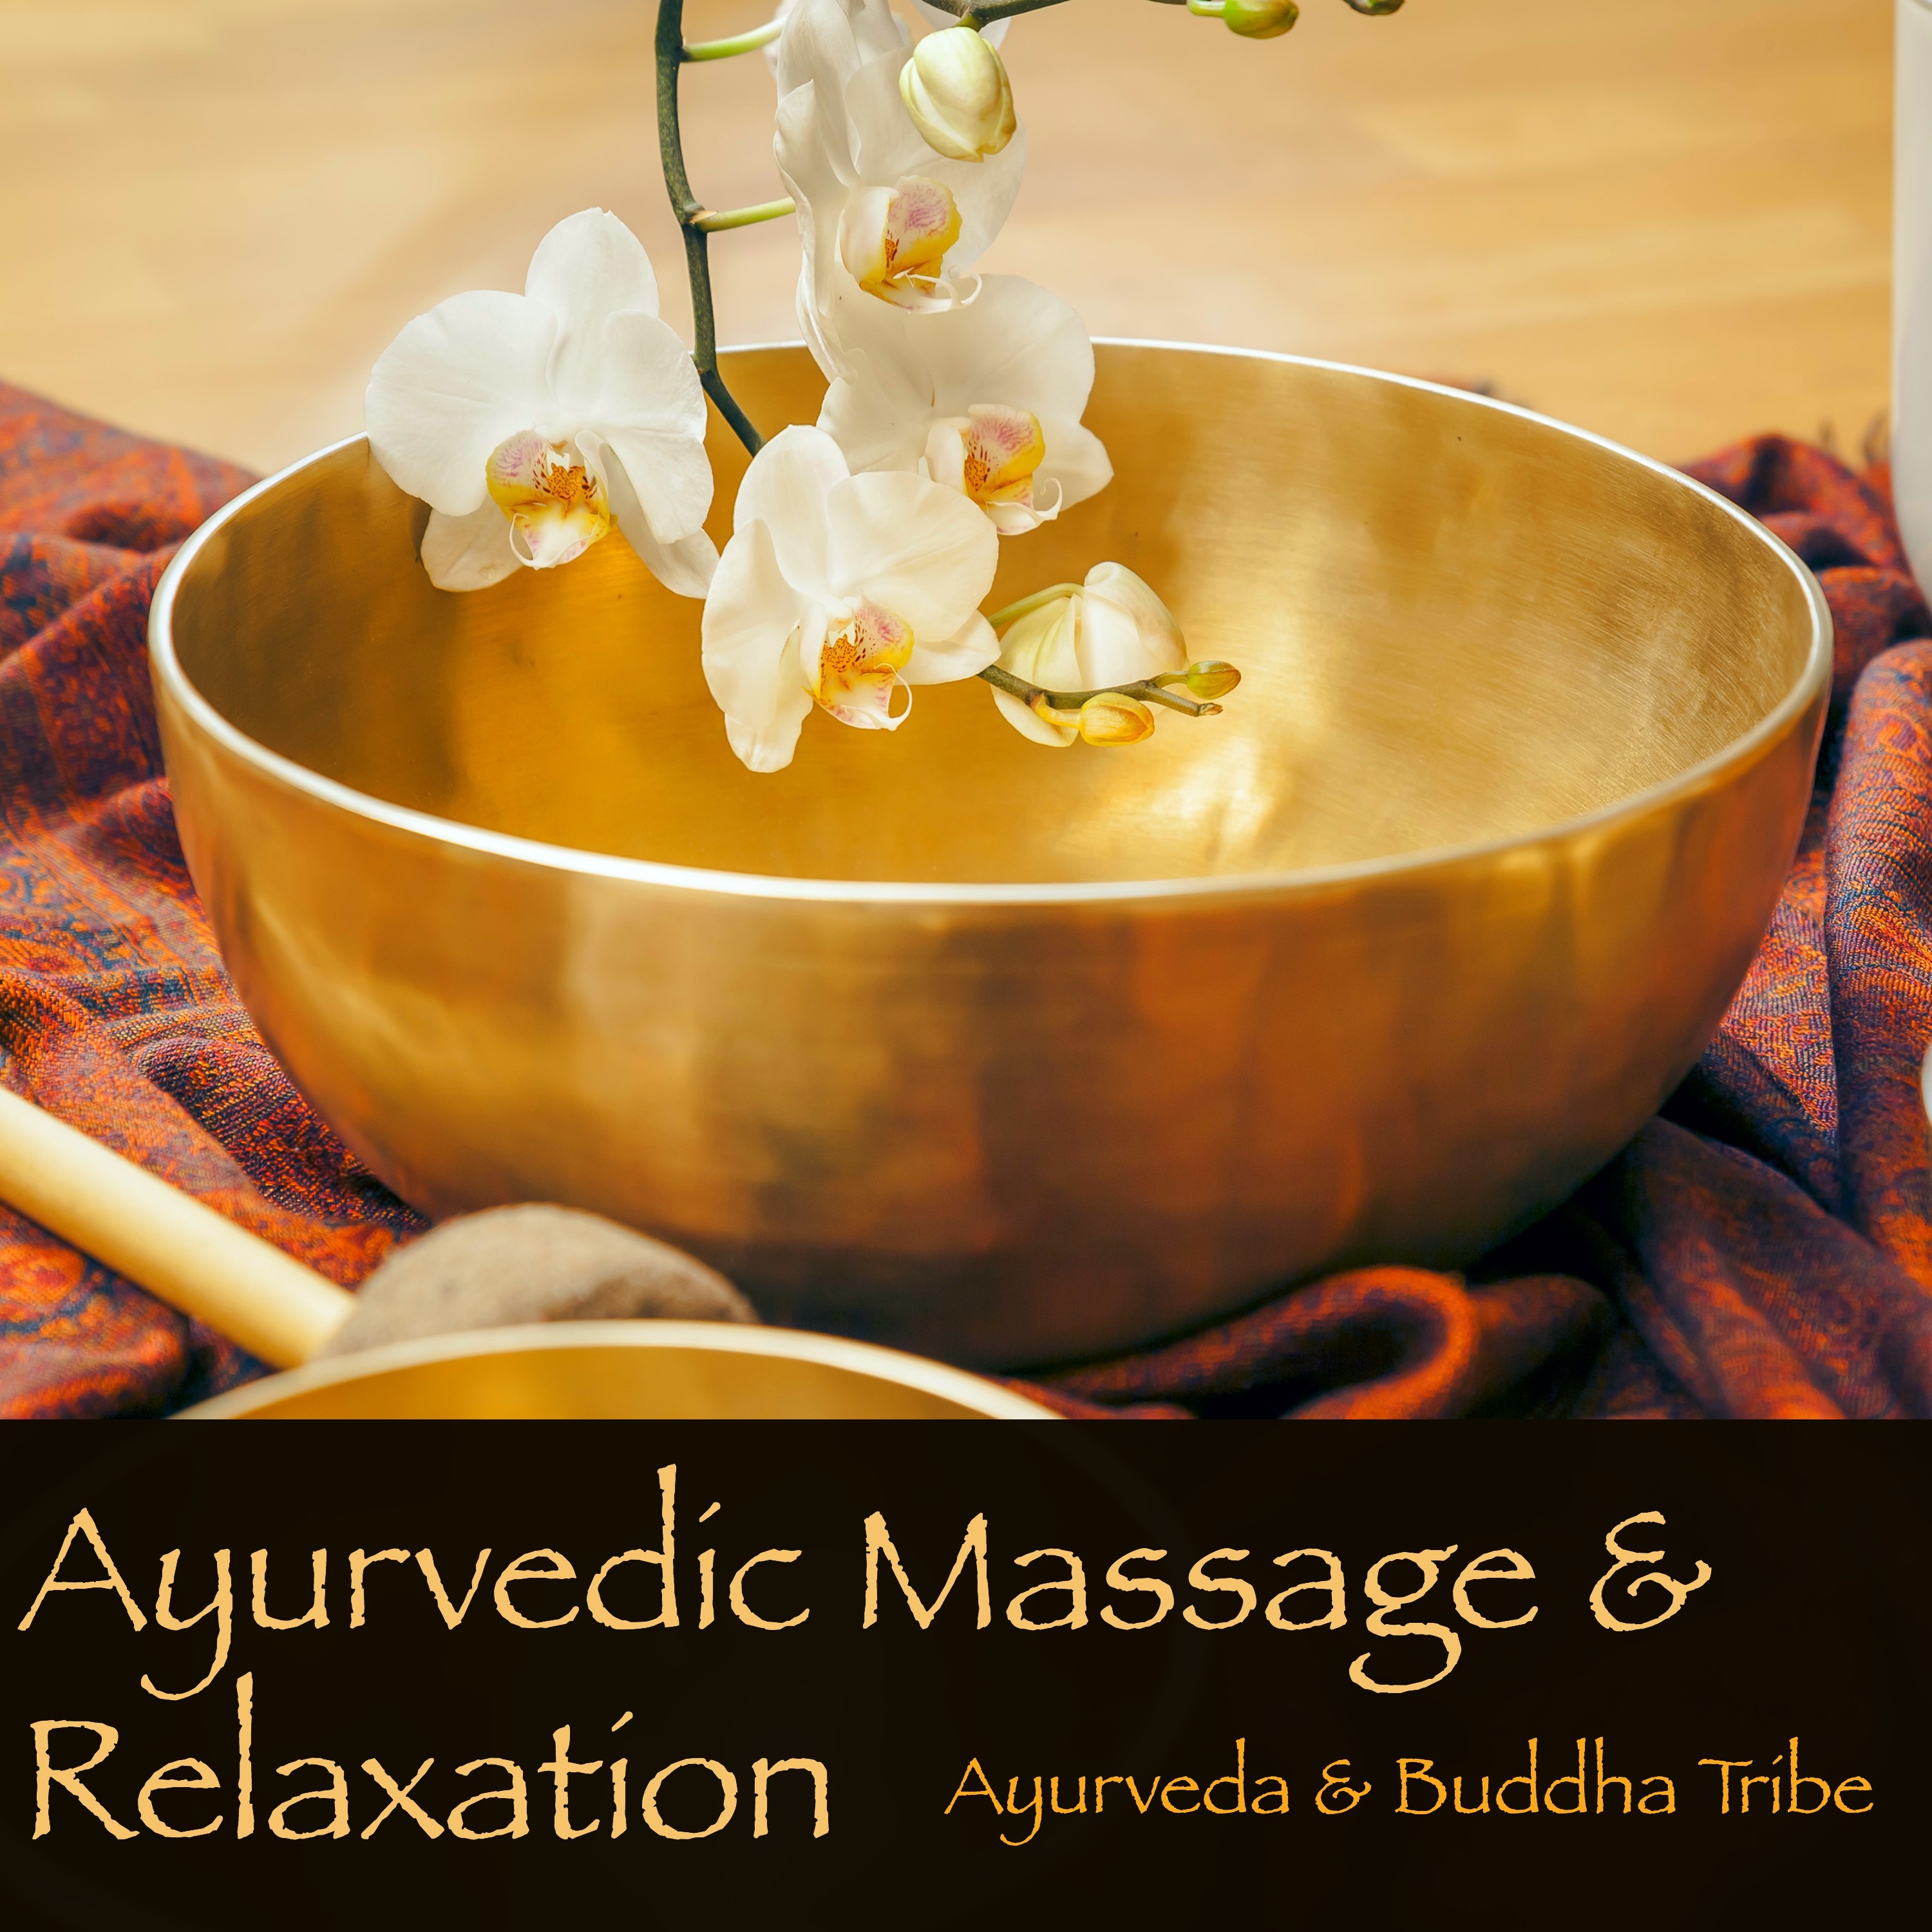 Ayurvedic Massage & Relaxation – Zen Music for Wellness Center and Yoga Space